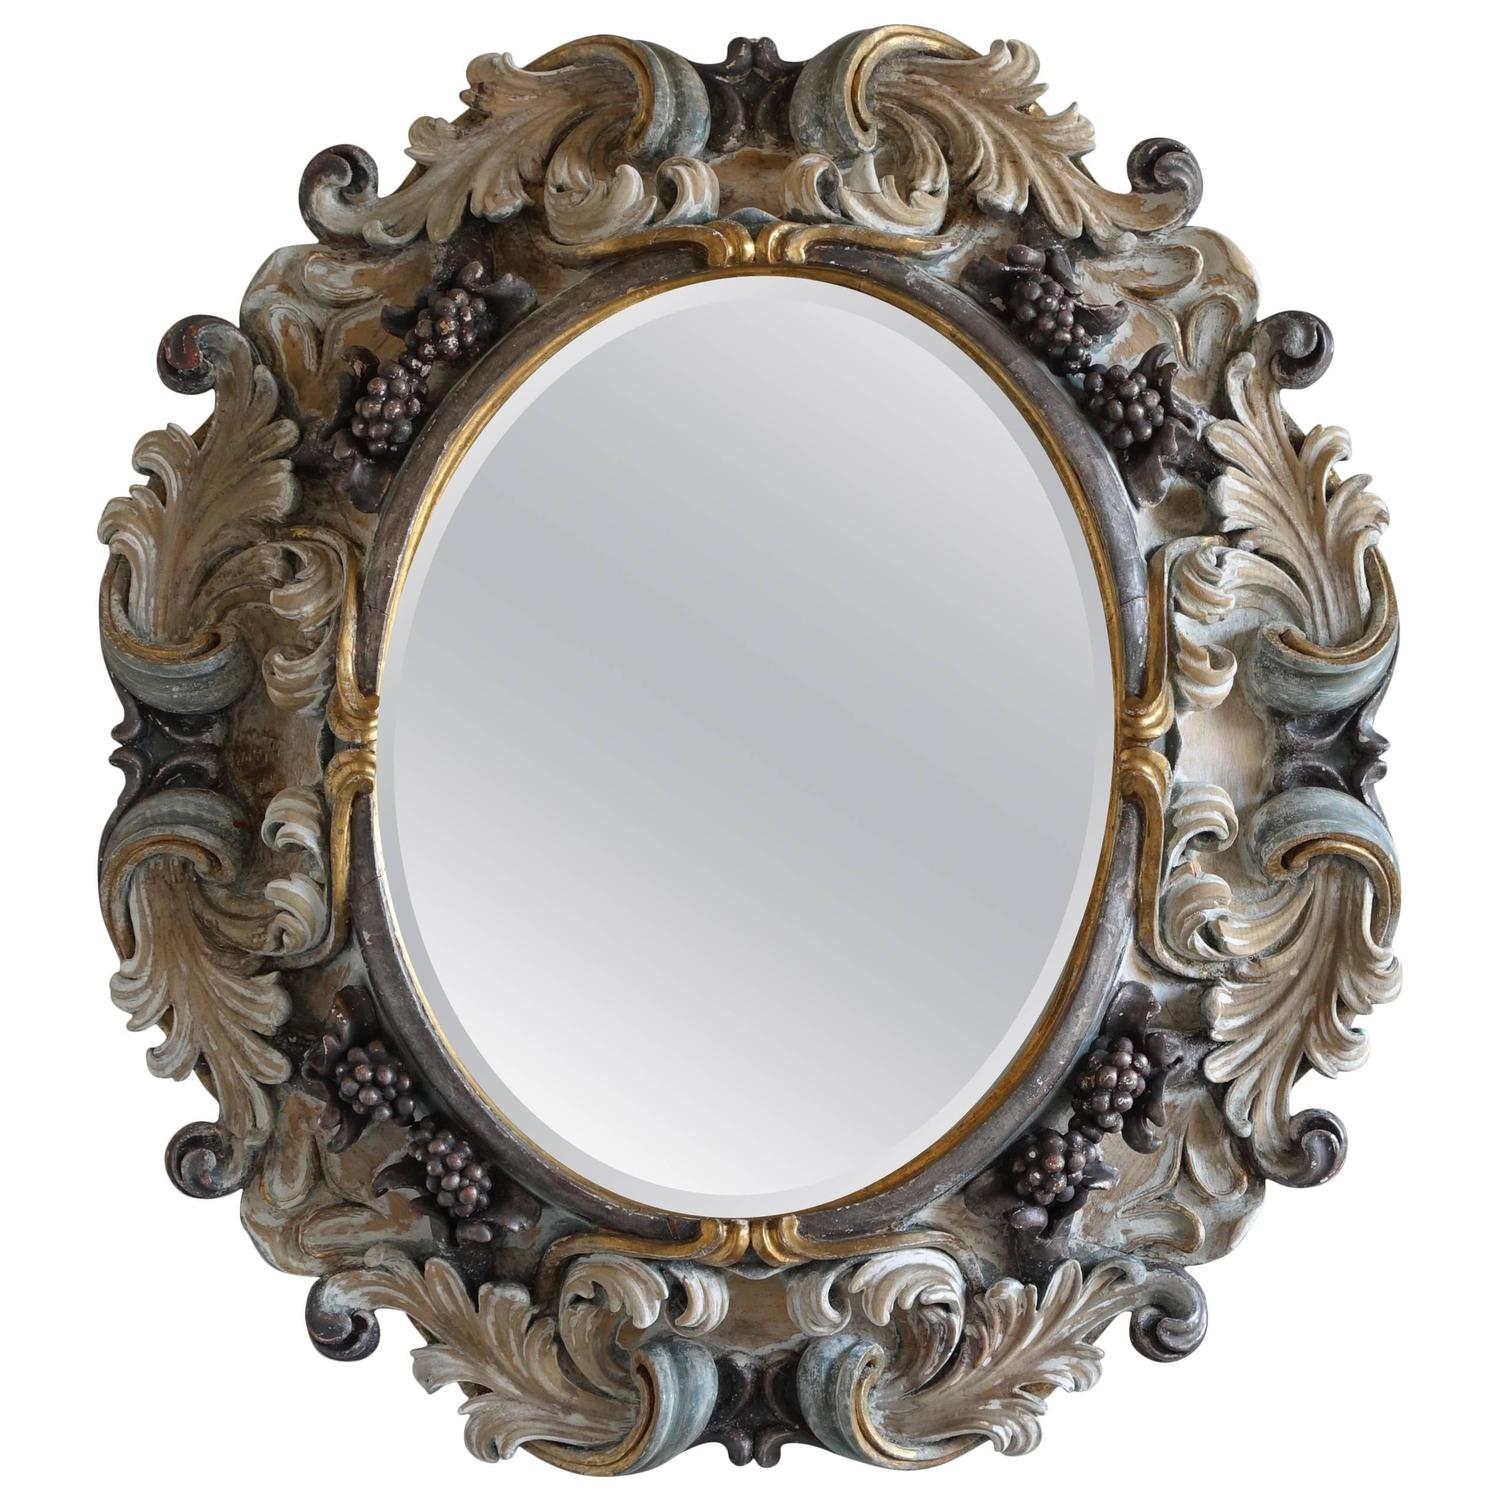 Italian Rococo Style Carved Wood Mirror, circa 1930s For Sale at 1stdibs